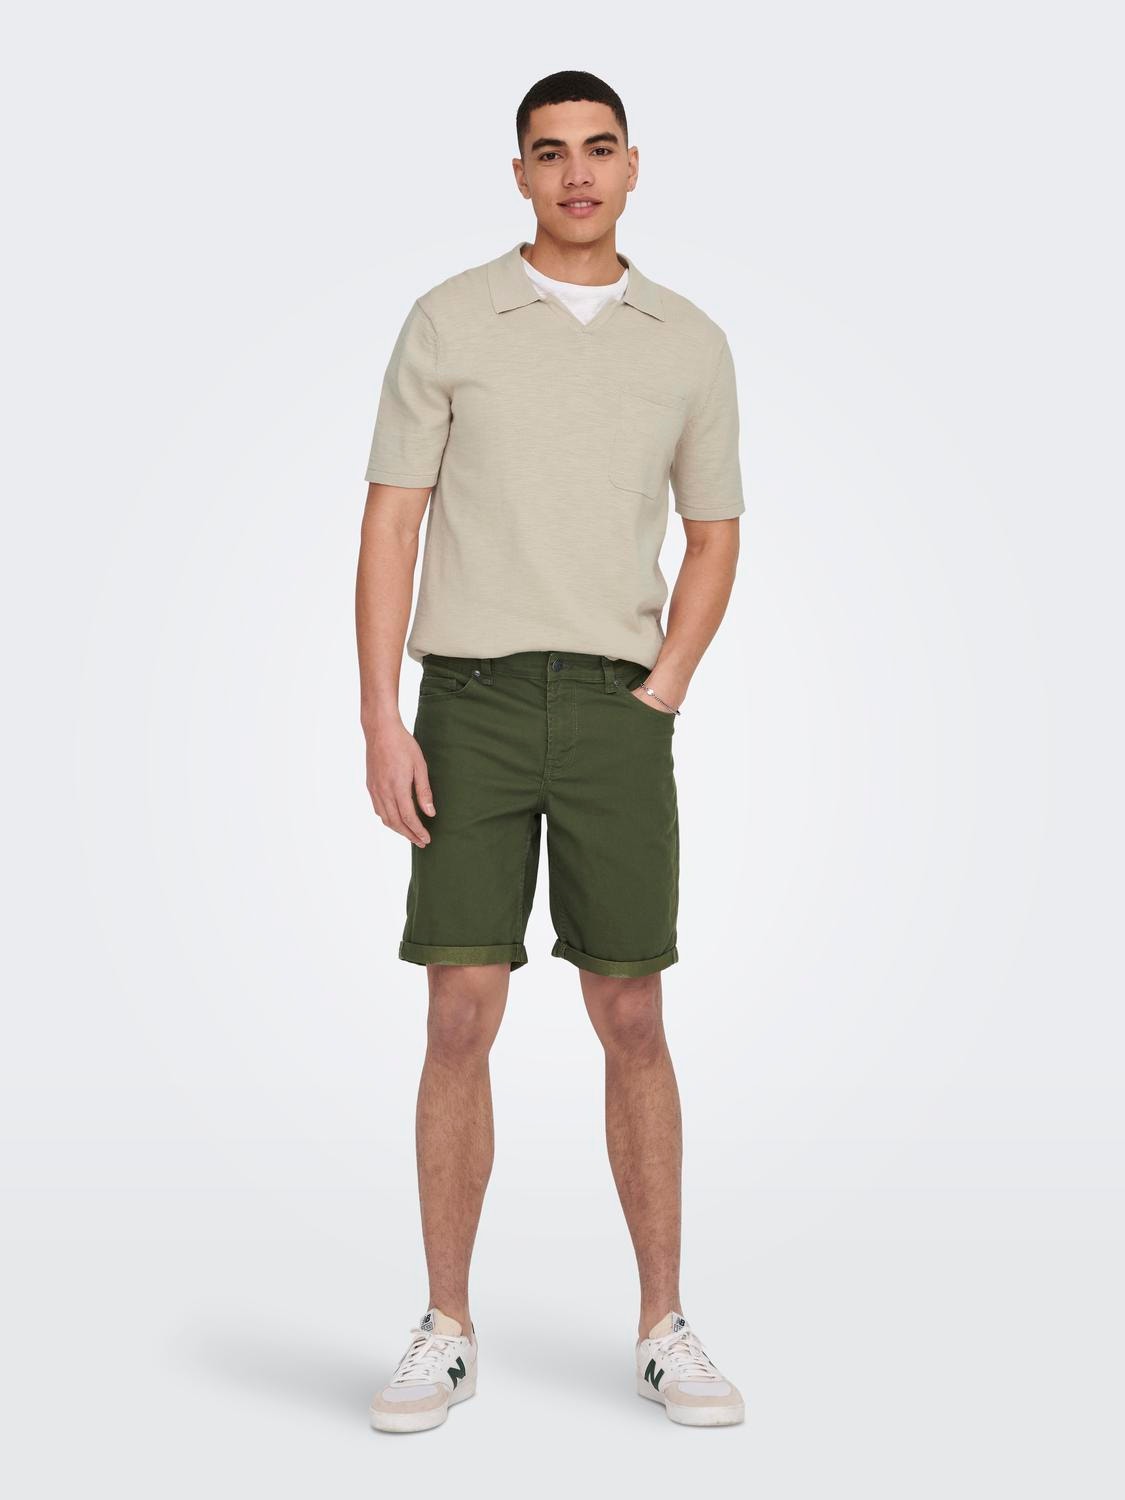 ONLY & SONS ONSPLY LIFE REG TWILL 4451 SHORTS -Olive Night - 22024451